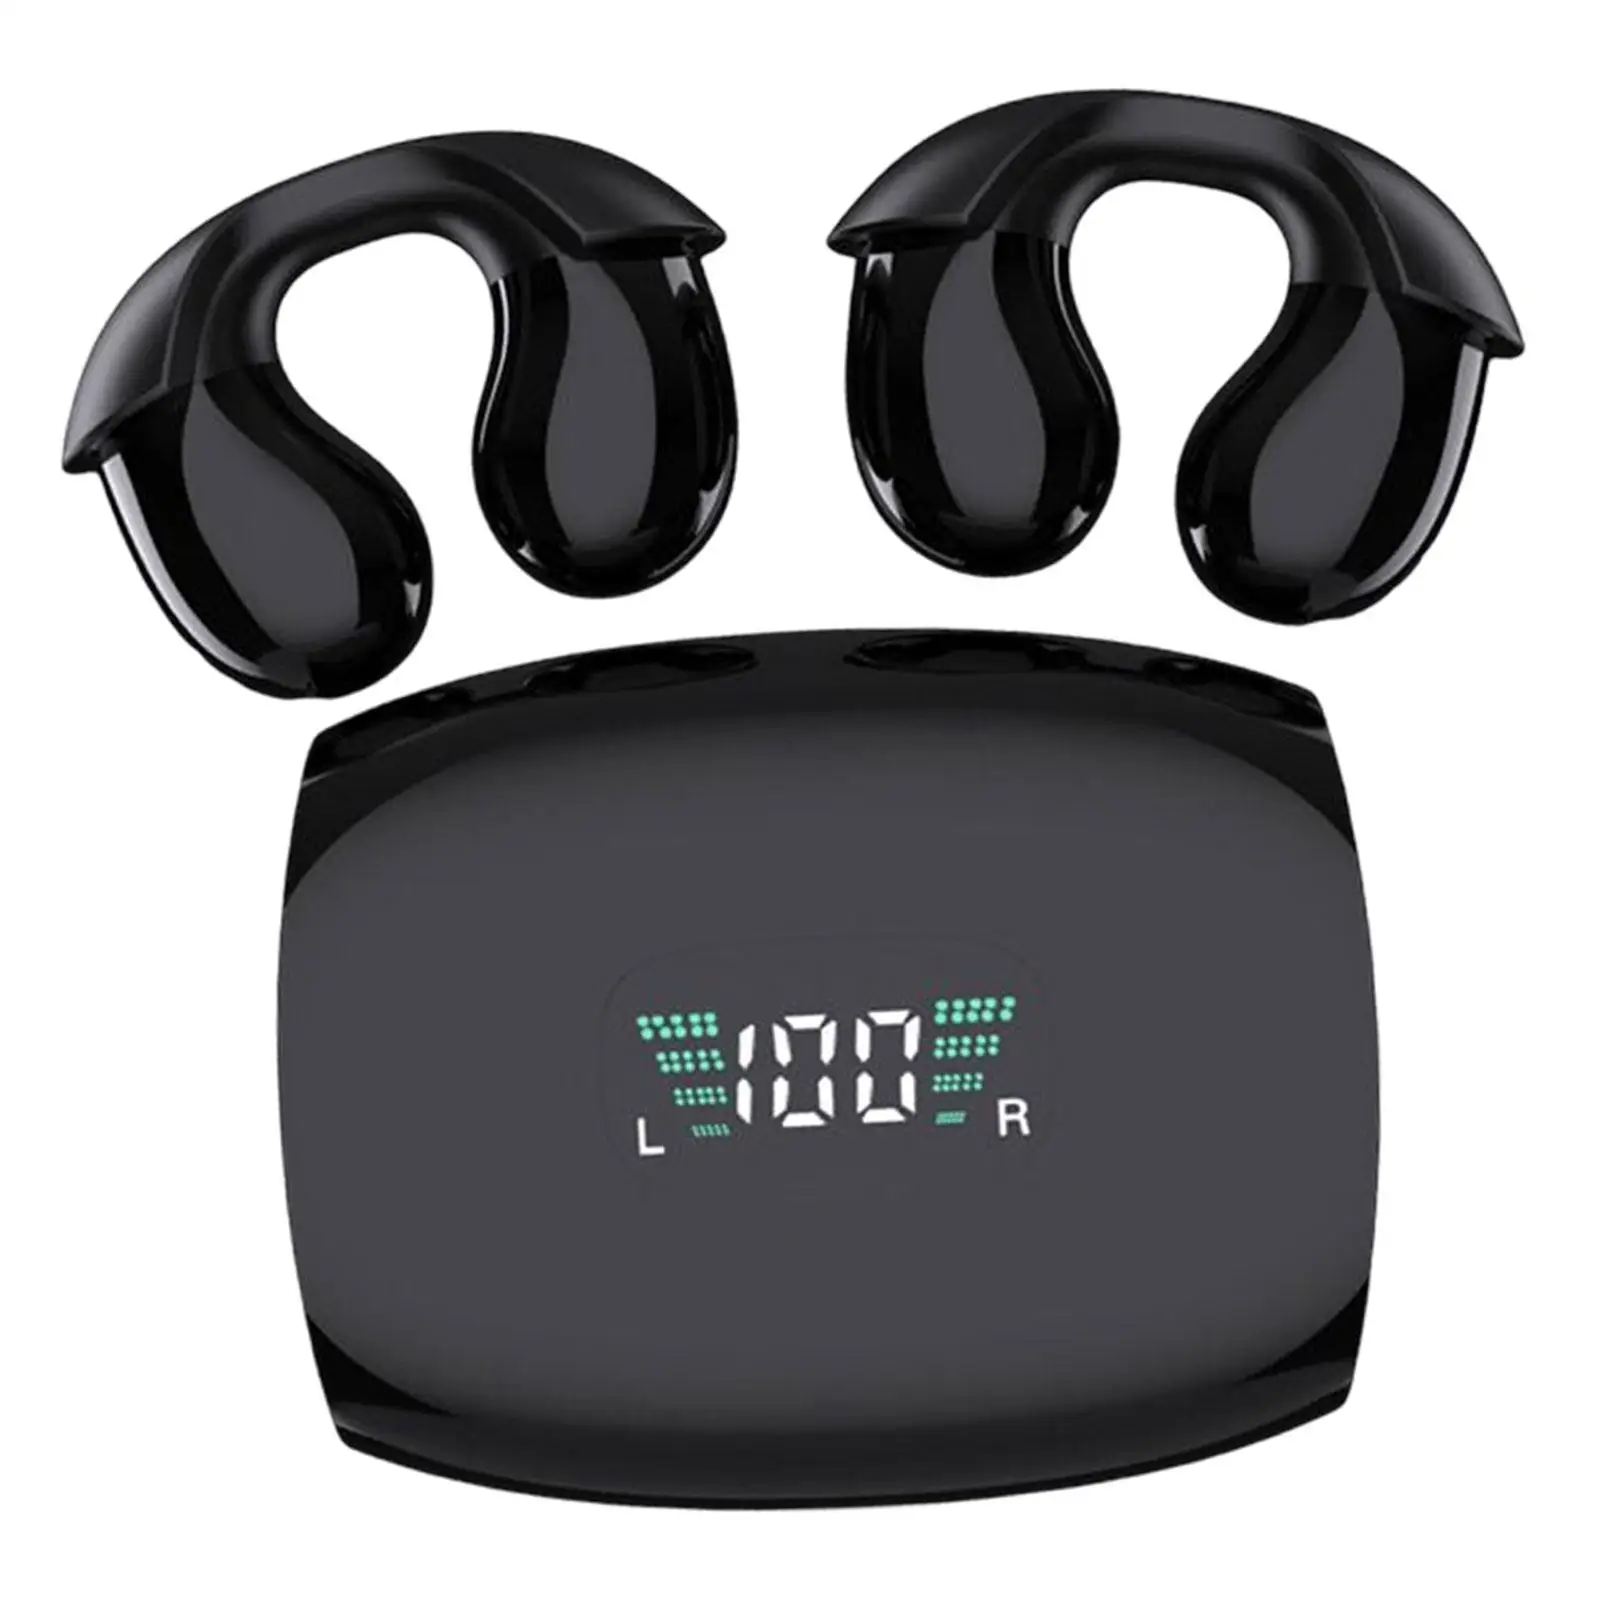 Ear Clip Headphones Touch Control Small Hands Free Premium Sound HiFi Sound Bone Conduction Earbuds for Video Game Music Outdoor